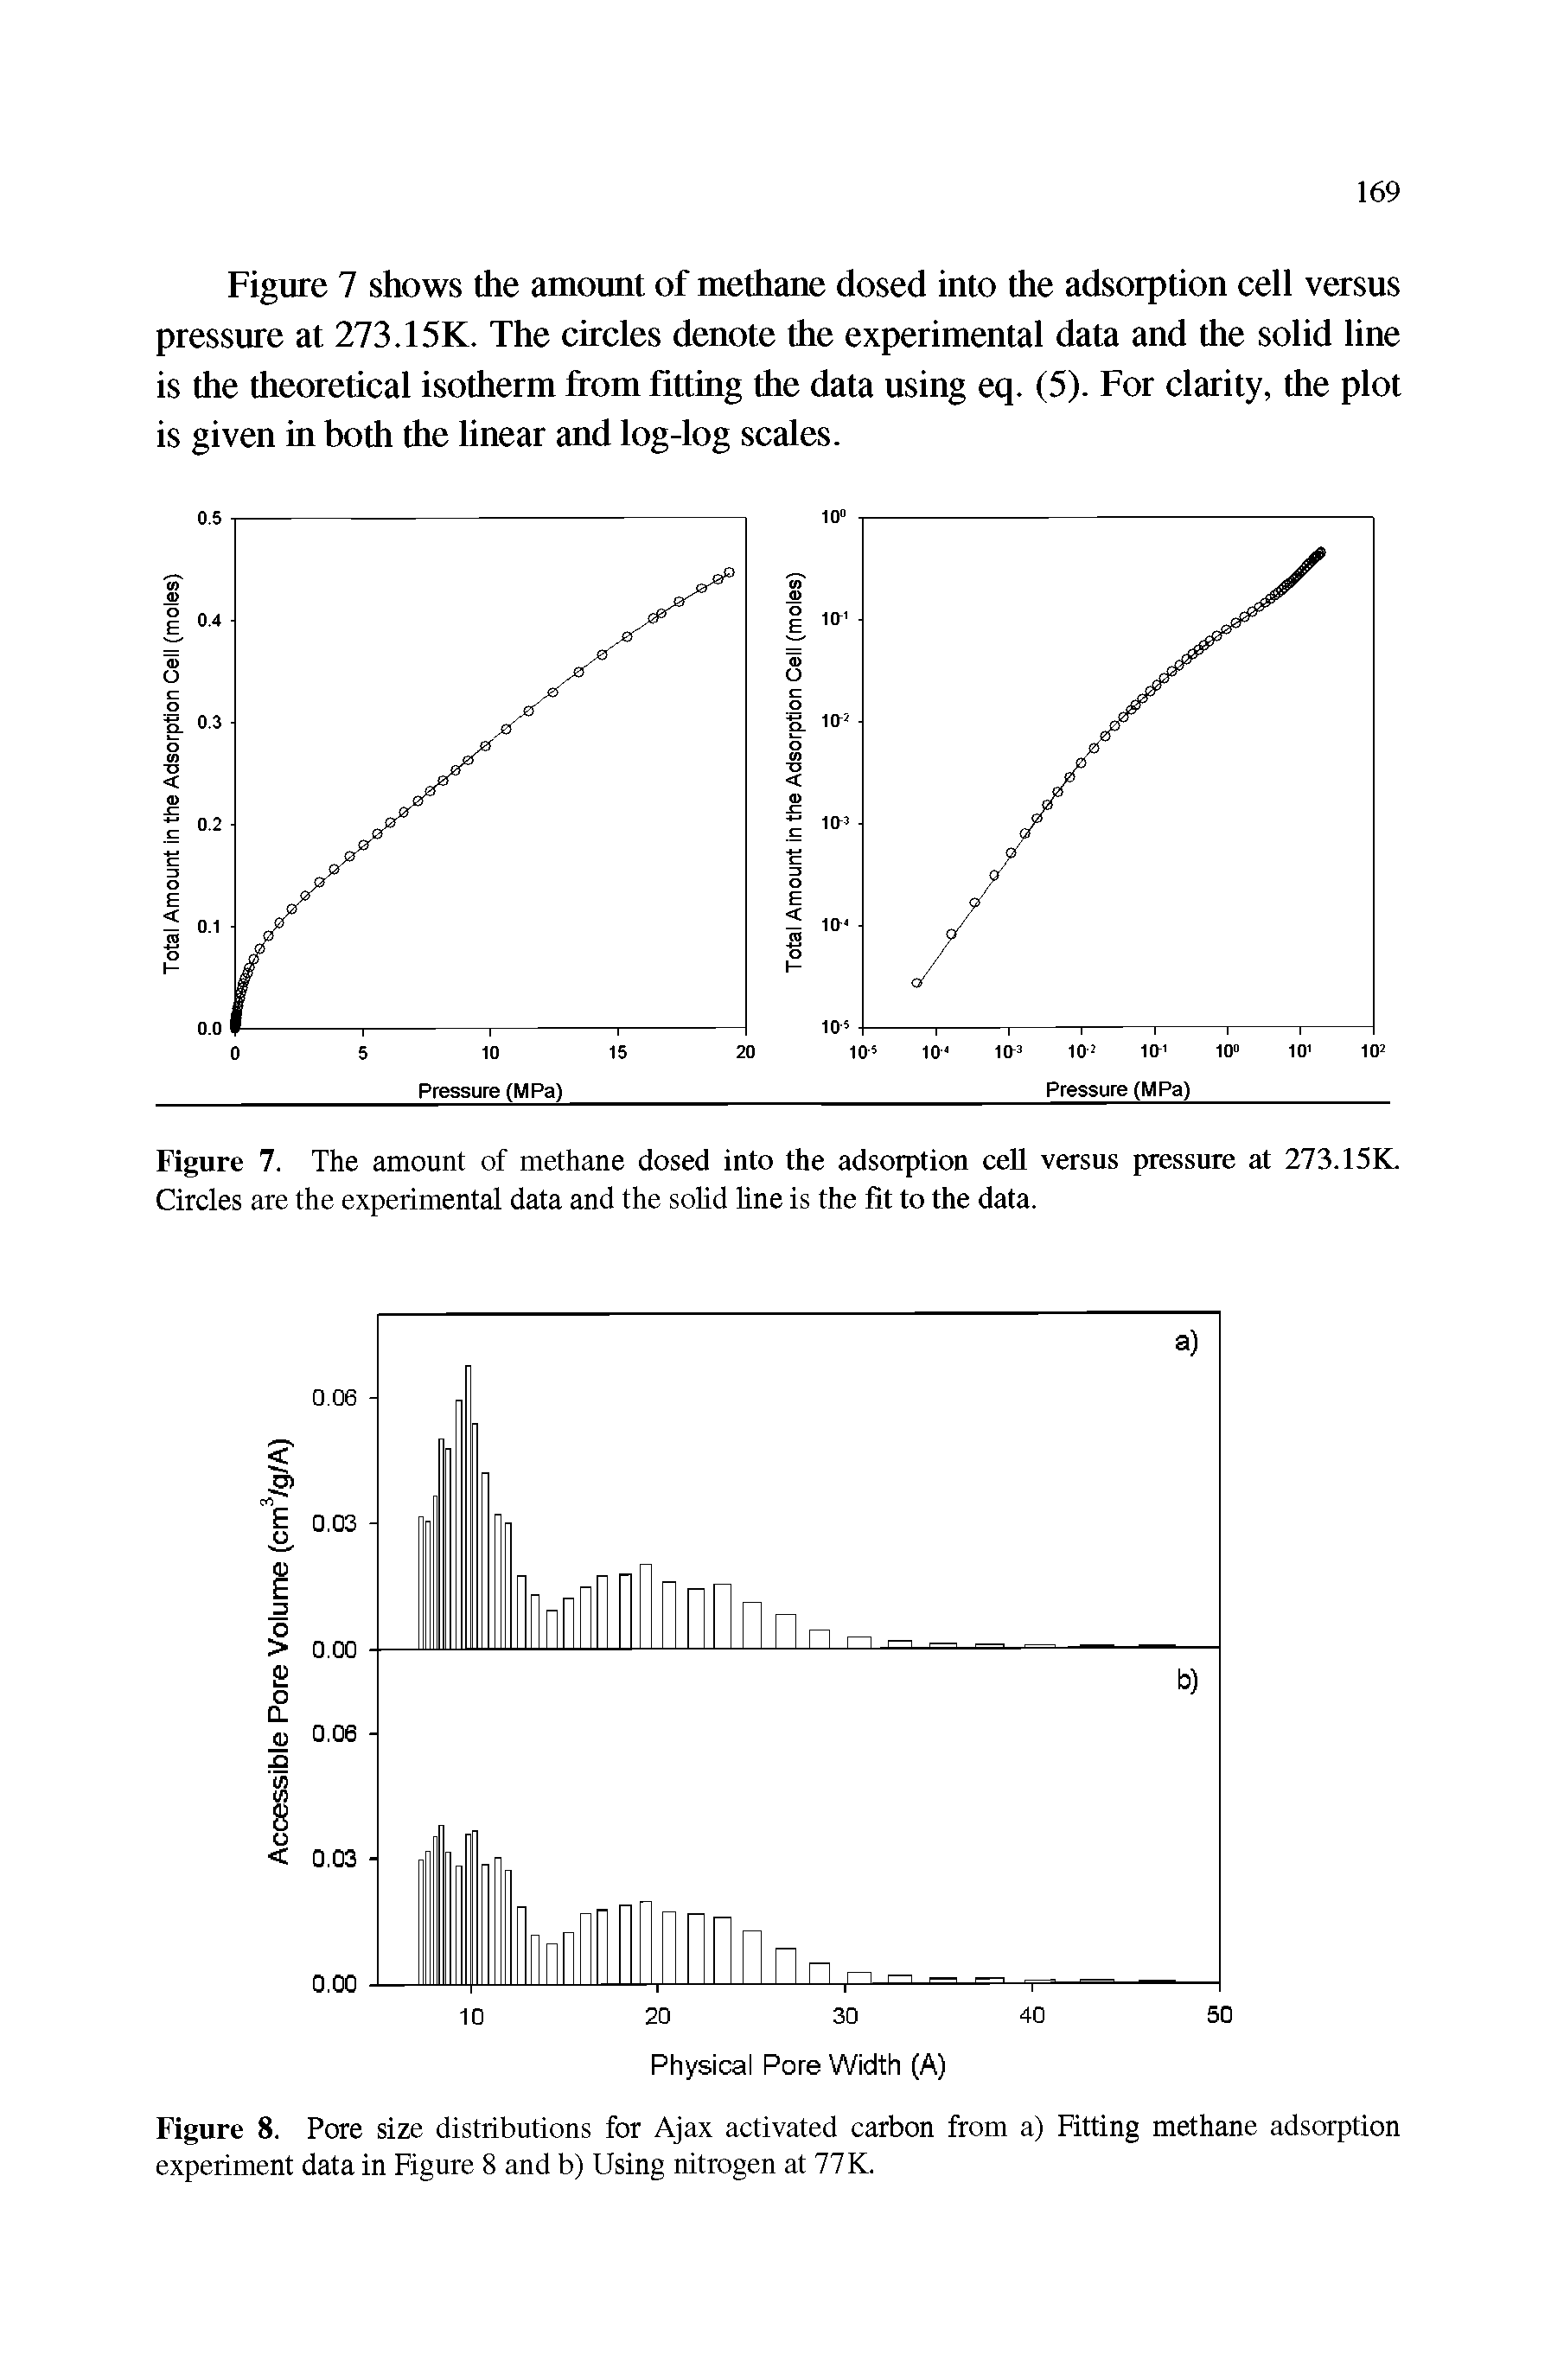 Figure 8. Pore size distributions for Ajax activated carbon from a) Fitting methane adsorption experiment data in Figure 8 and b) Using nitrogen at 77K.